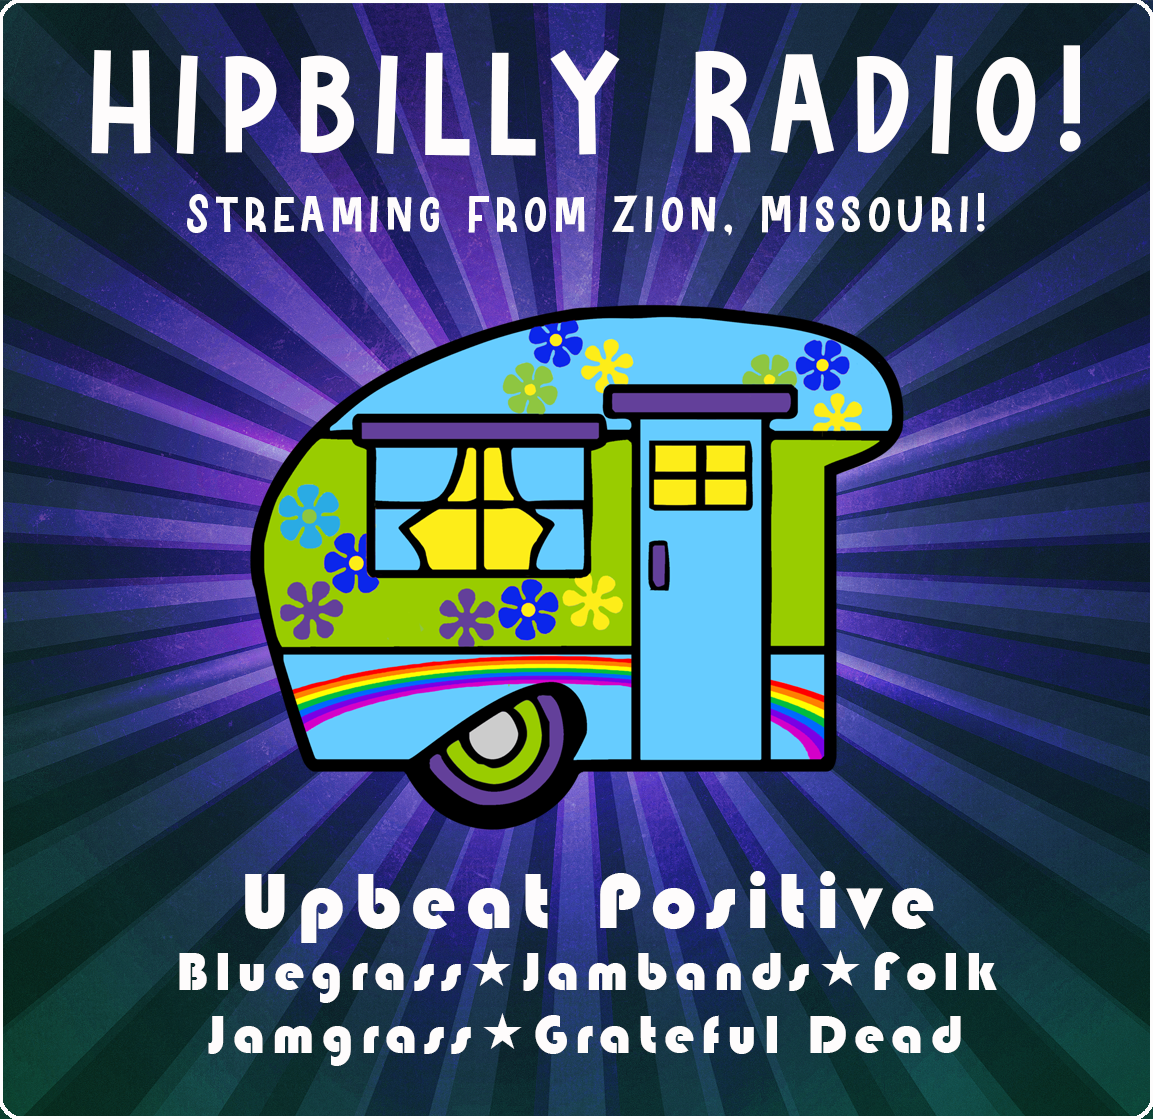 Art for Thank you for listening to Hipbilly Radio! by Hipbilly Hippy